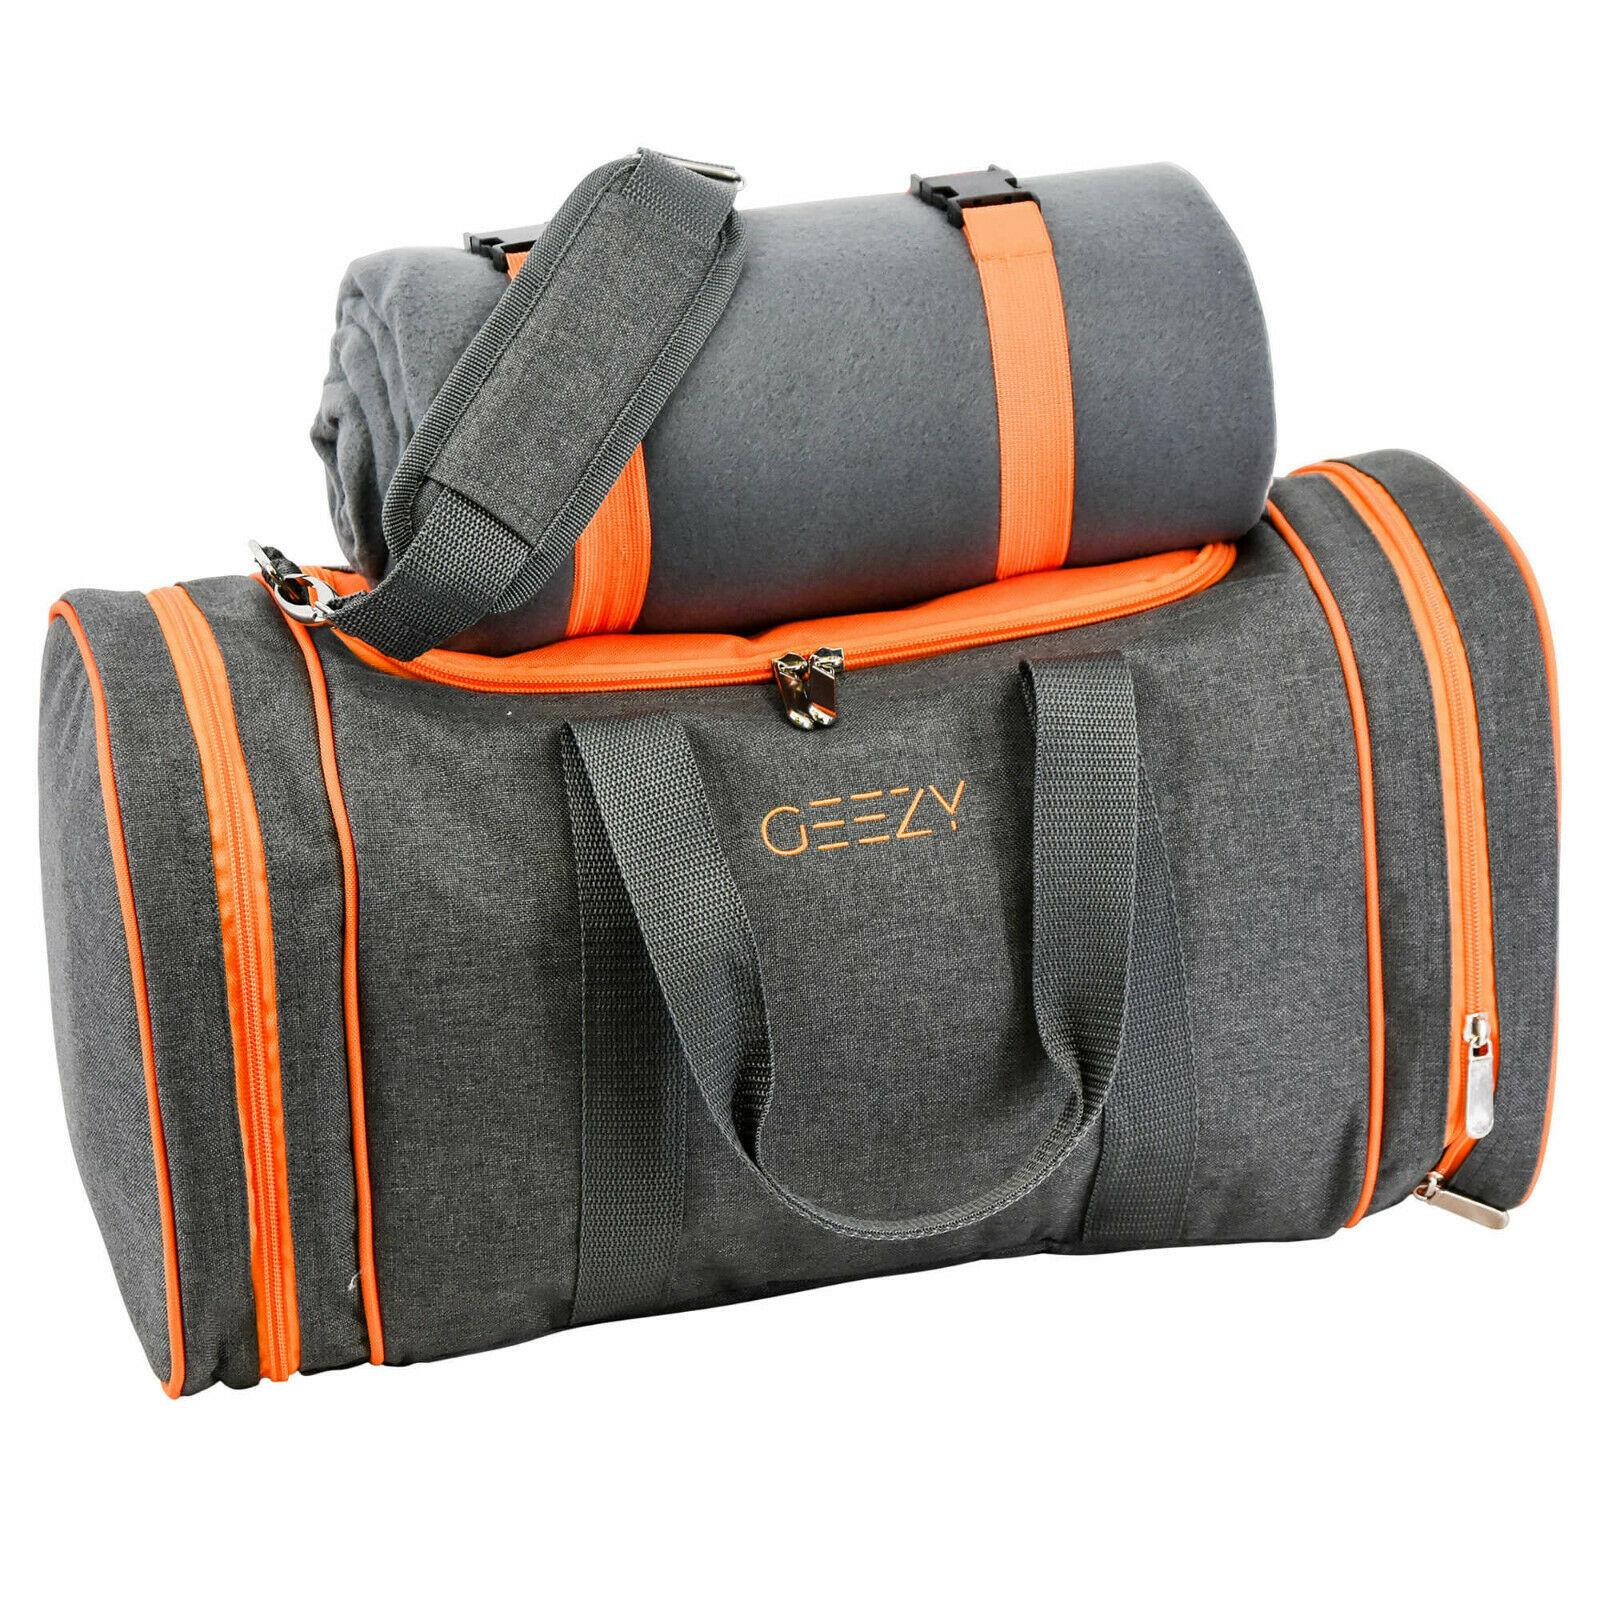 4 Person Insulated Bag by Geezy - UKBuyZone